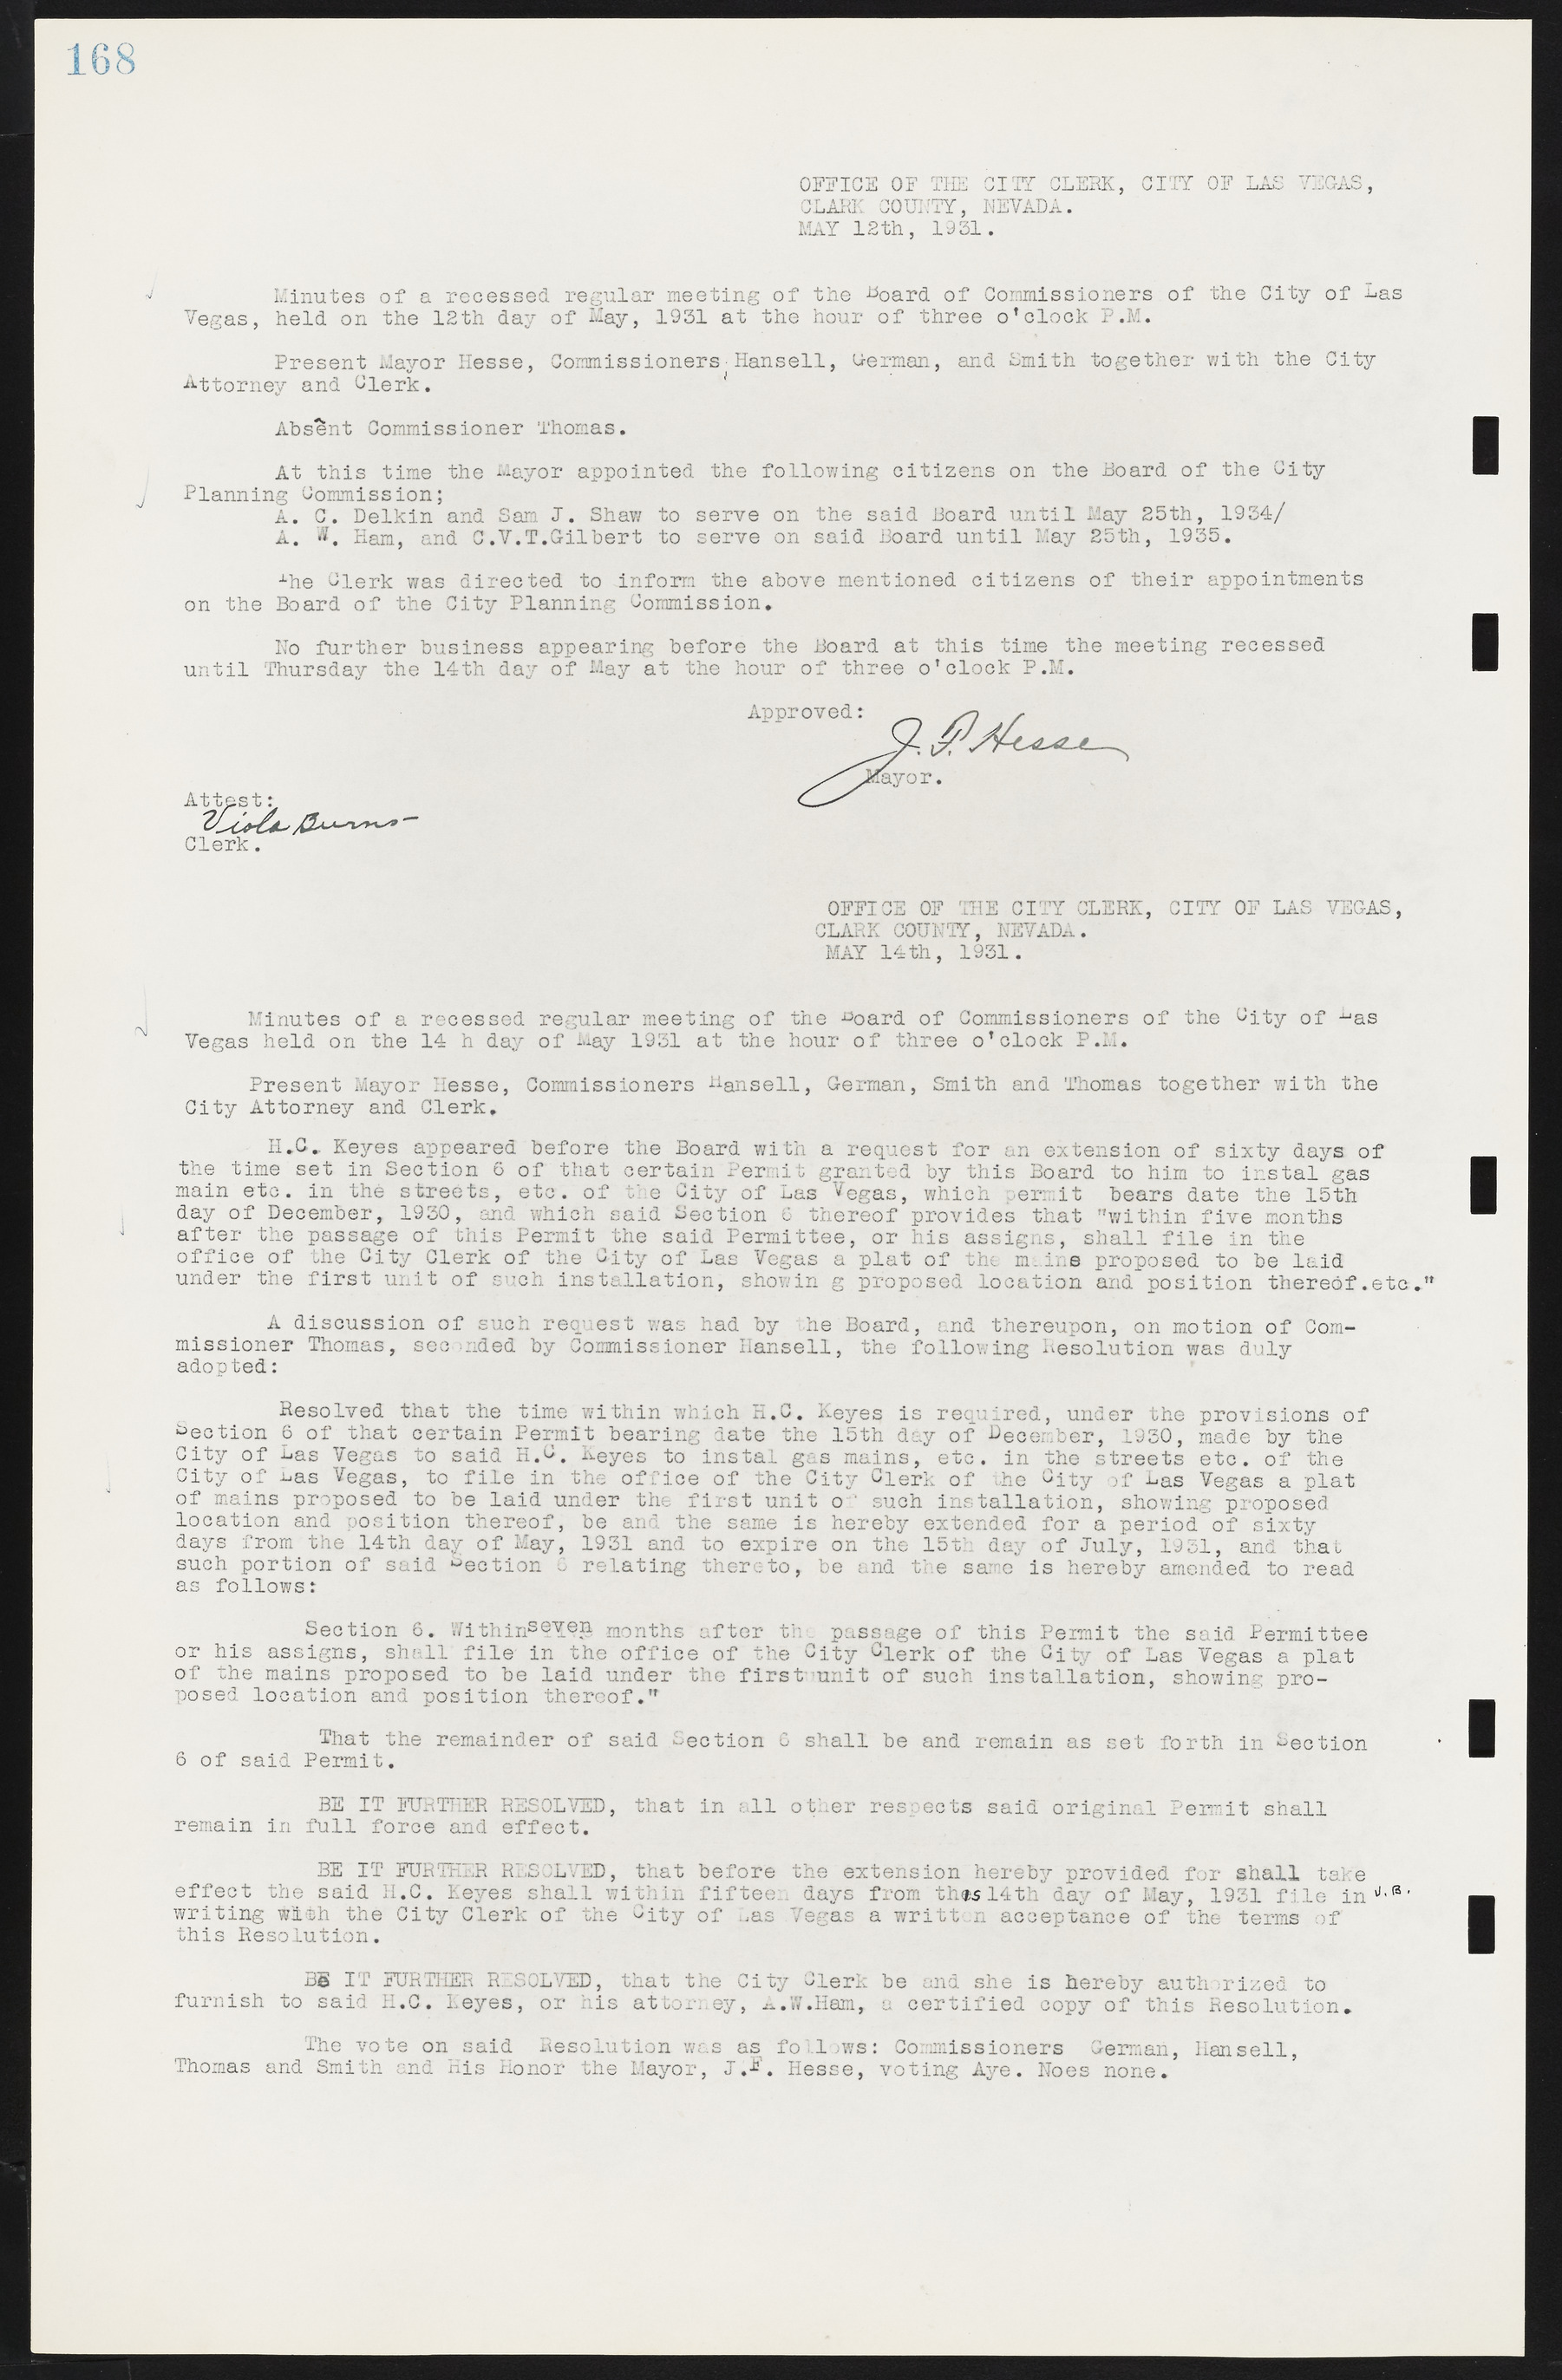 Las Vegas City Commission Minutes, May 14, 1929 to February 11, 1937, lvc000003-174